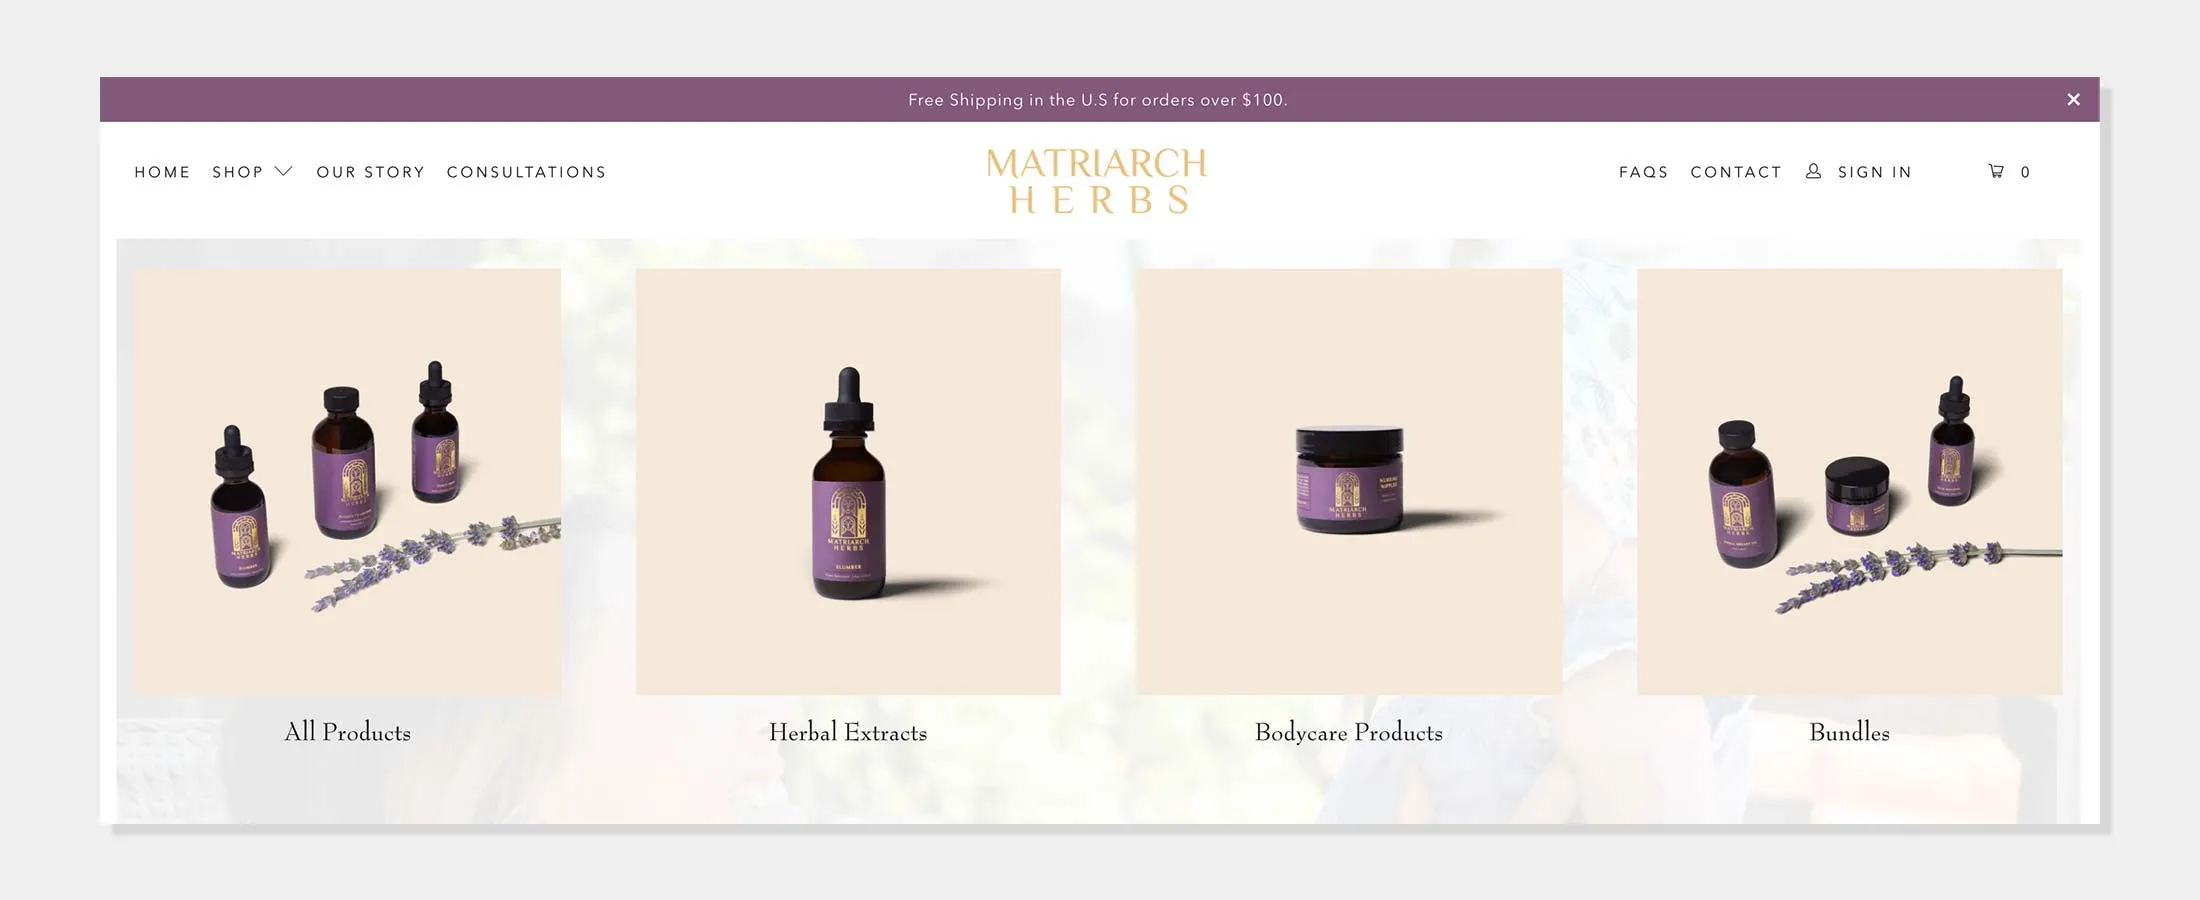 Matriarch Herbs - Herbal Extracts and Bodycare